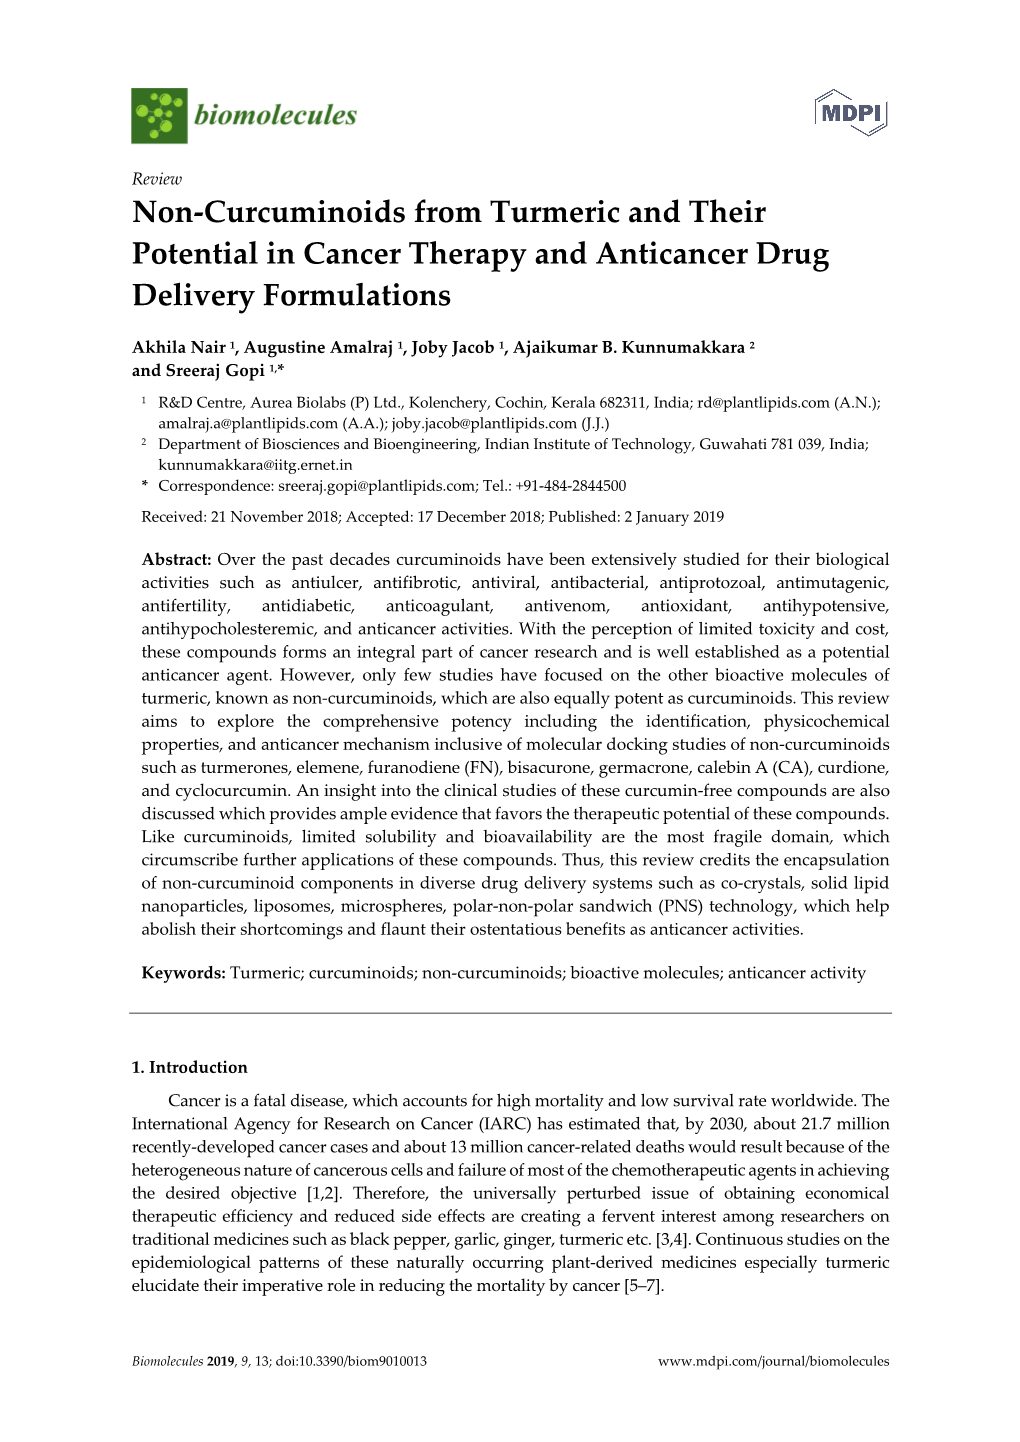 Non-Curcuminoids from Turmeric and Their Potential in Cancer Therapy and Anticancer Drug Delivery Formulations